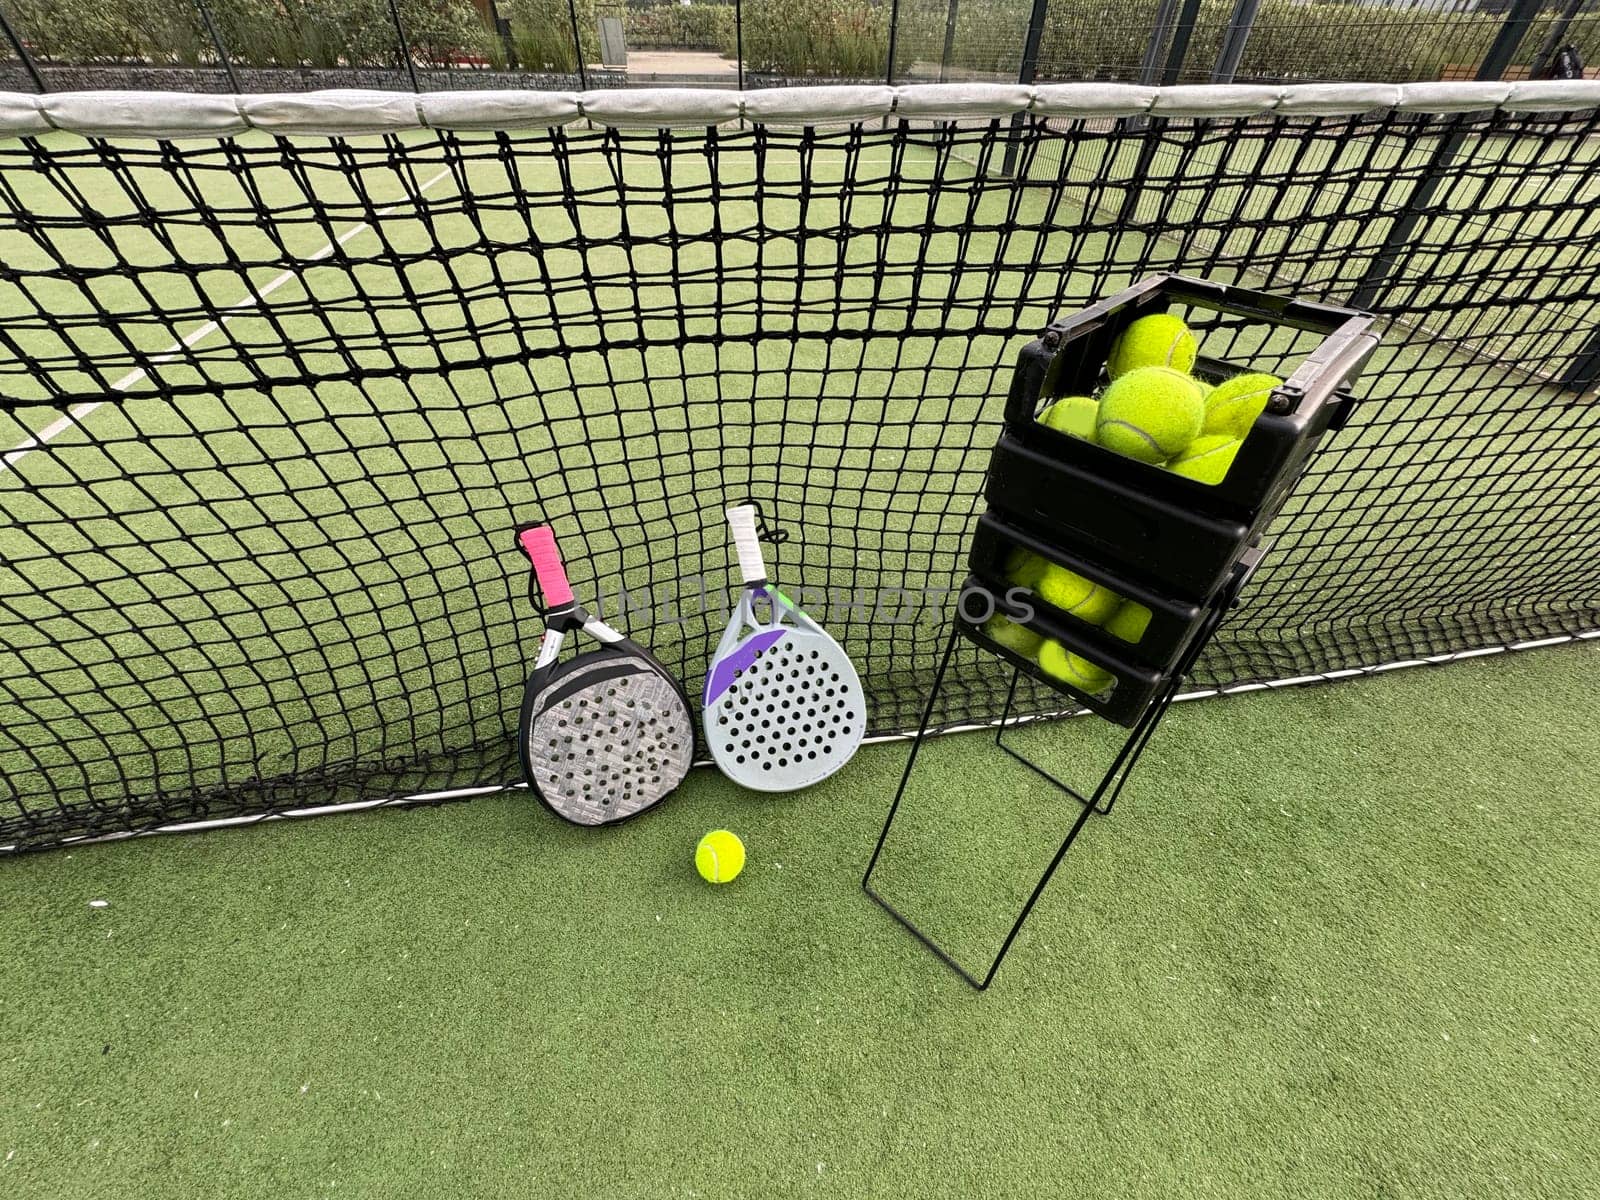 padel tennis racket sport court and balls. High quality photo